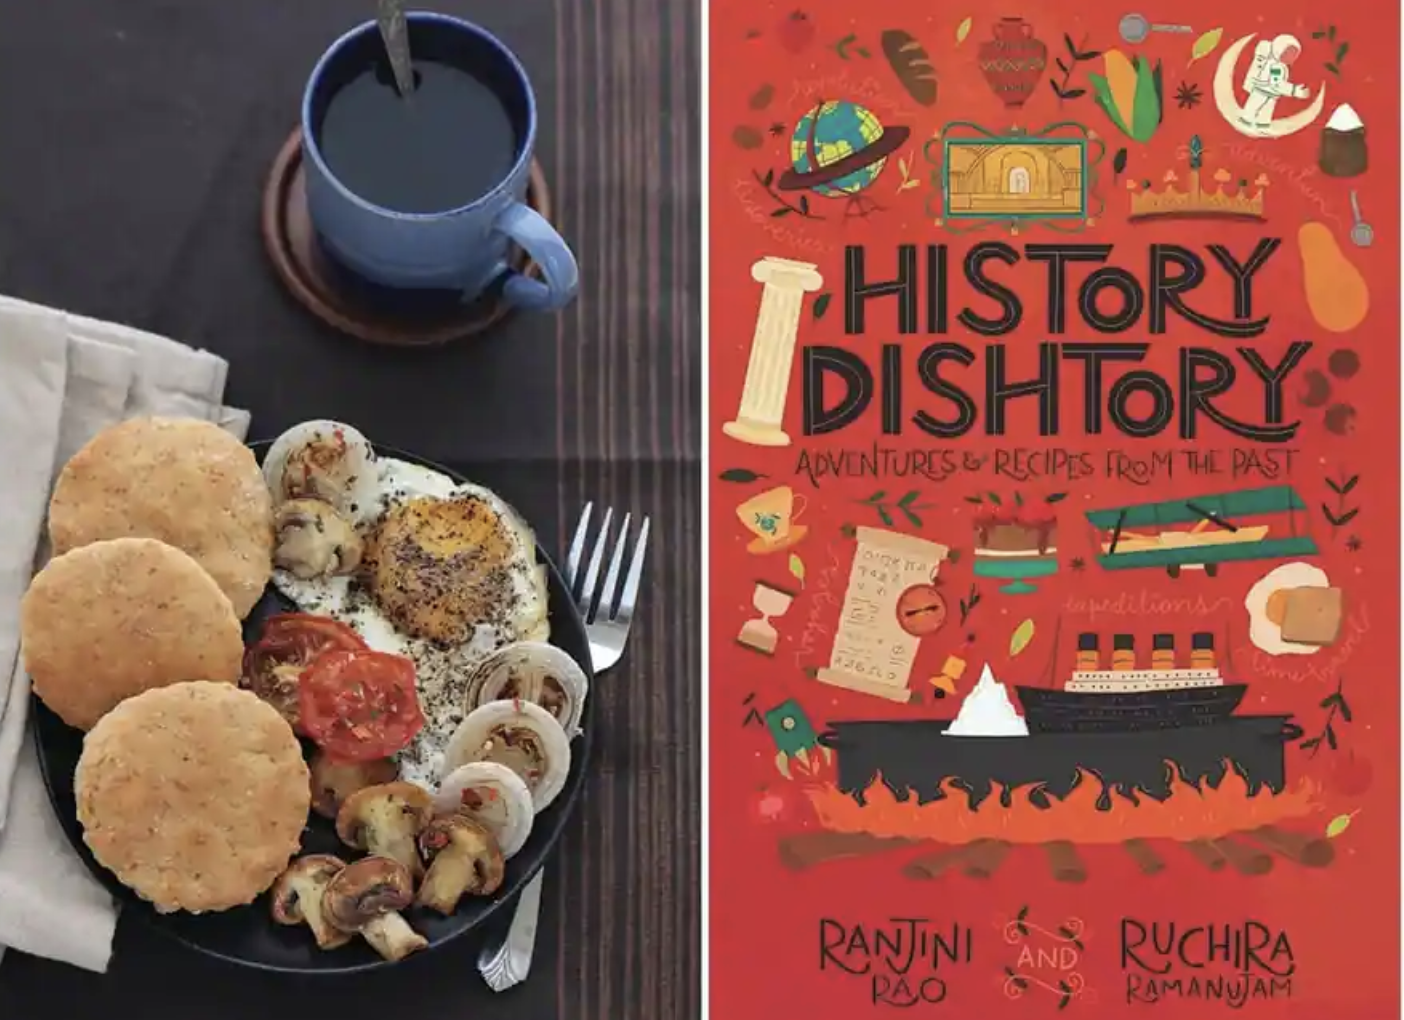 A new book that introduces kids to a taste of history